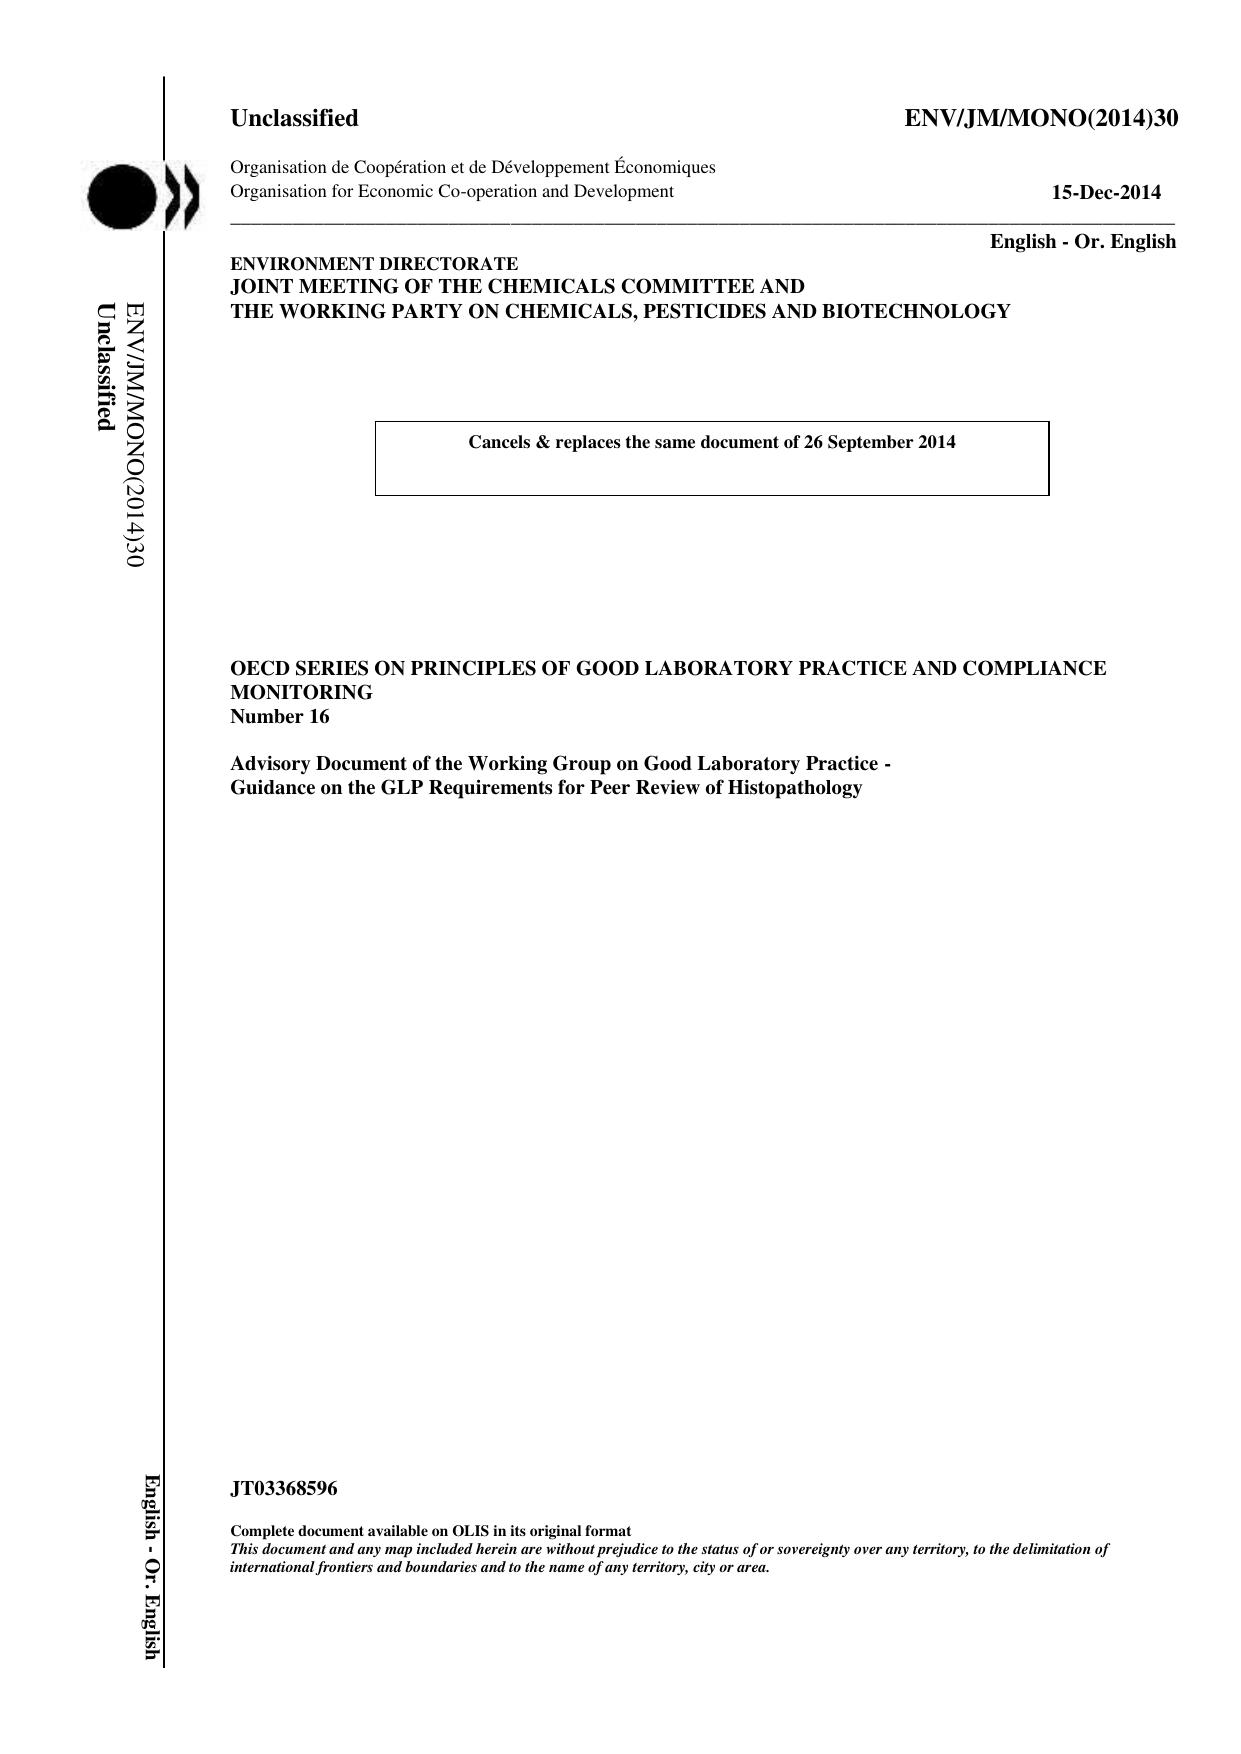 Advisory document of the Working Group on Good Laboratory (2014)